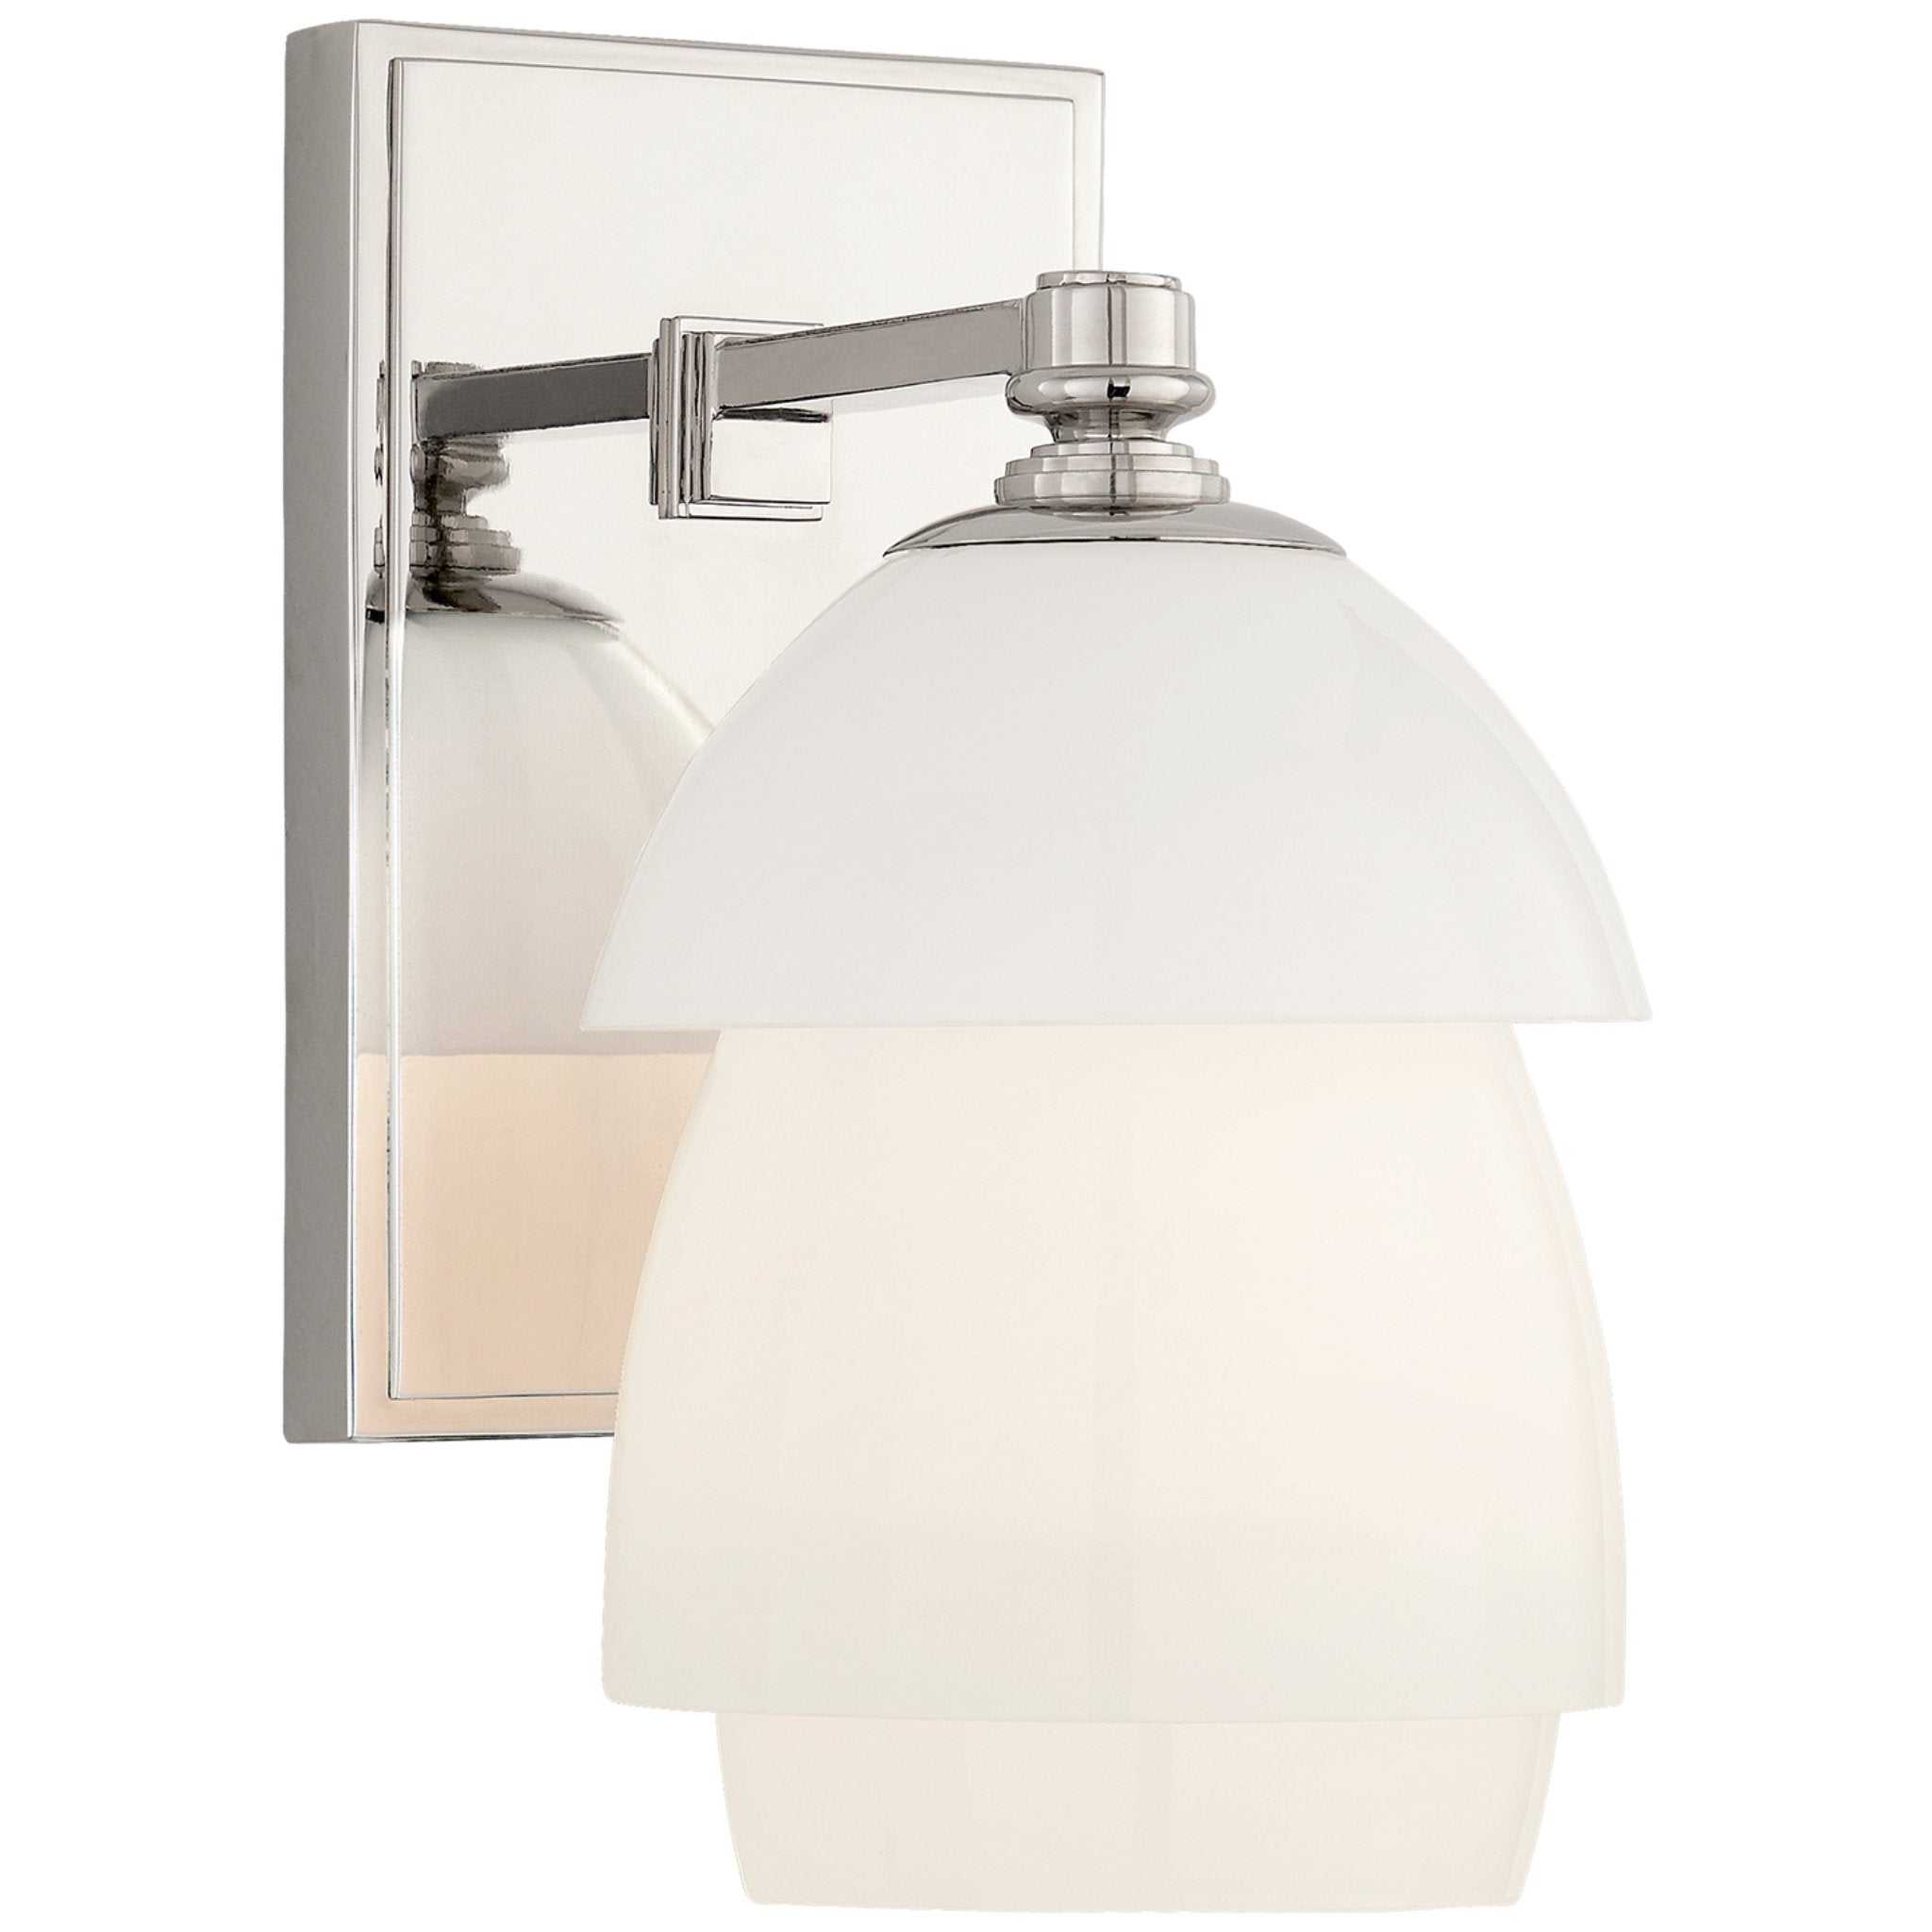 Thomas O'Brien Whitman Small Sconce in Polished Nickel with White Glass Shade